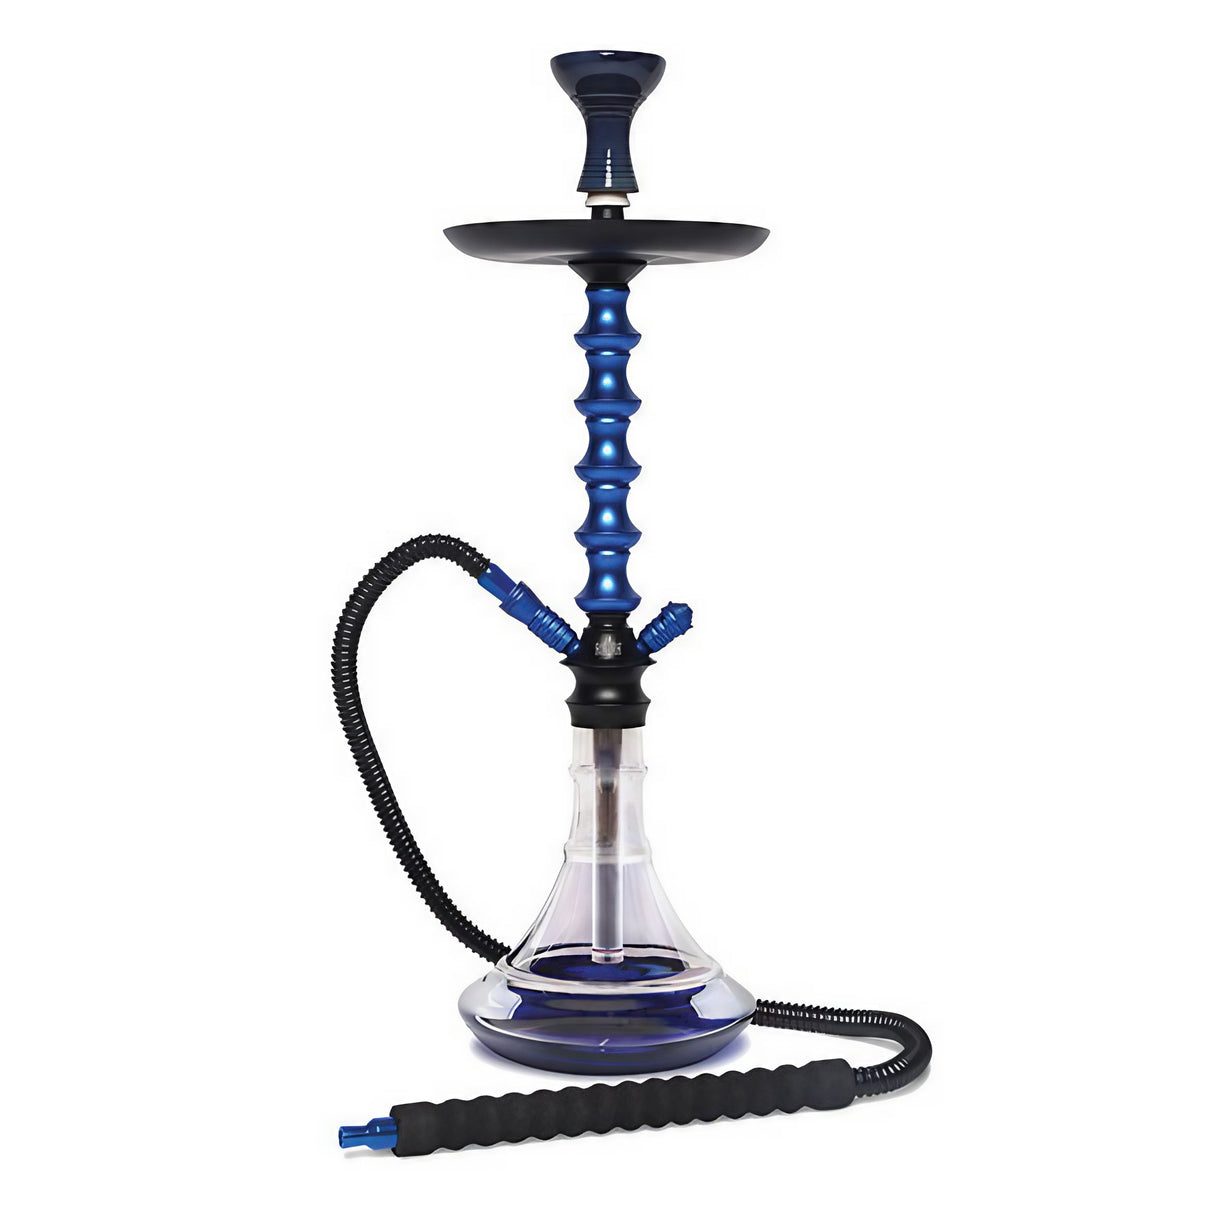 BYO Taurus Hookah - 24" with 1-Hose, Front View on White Background